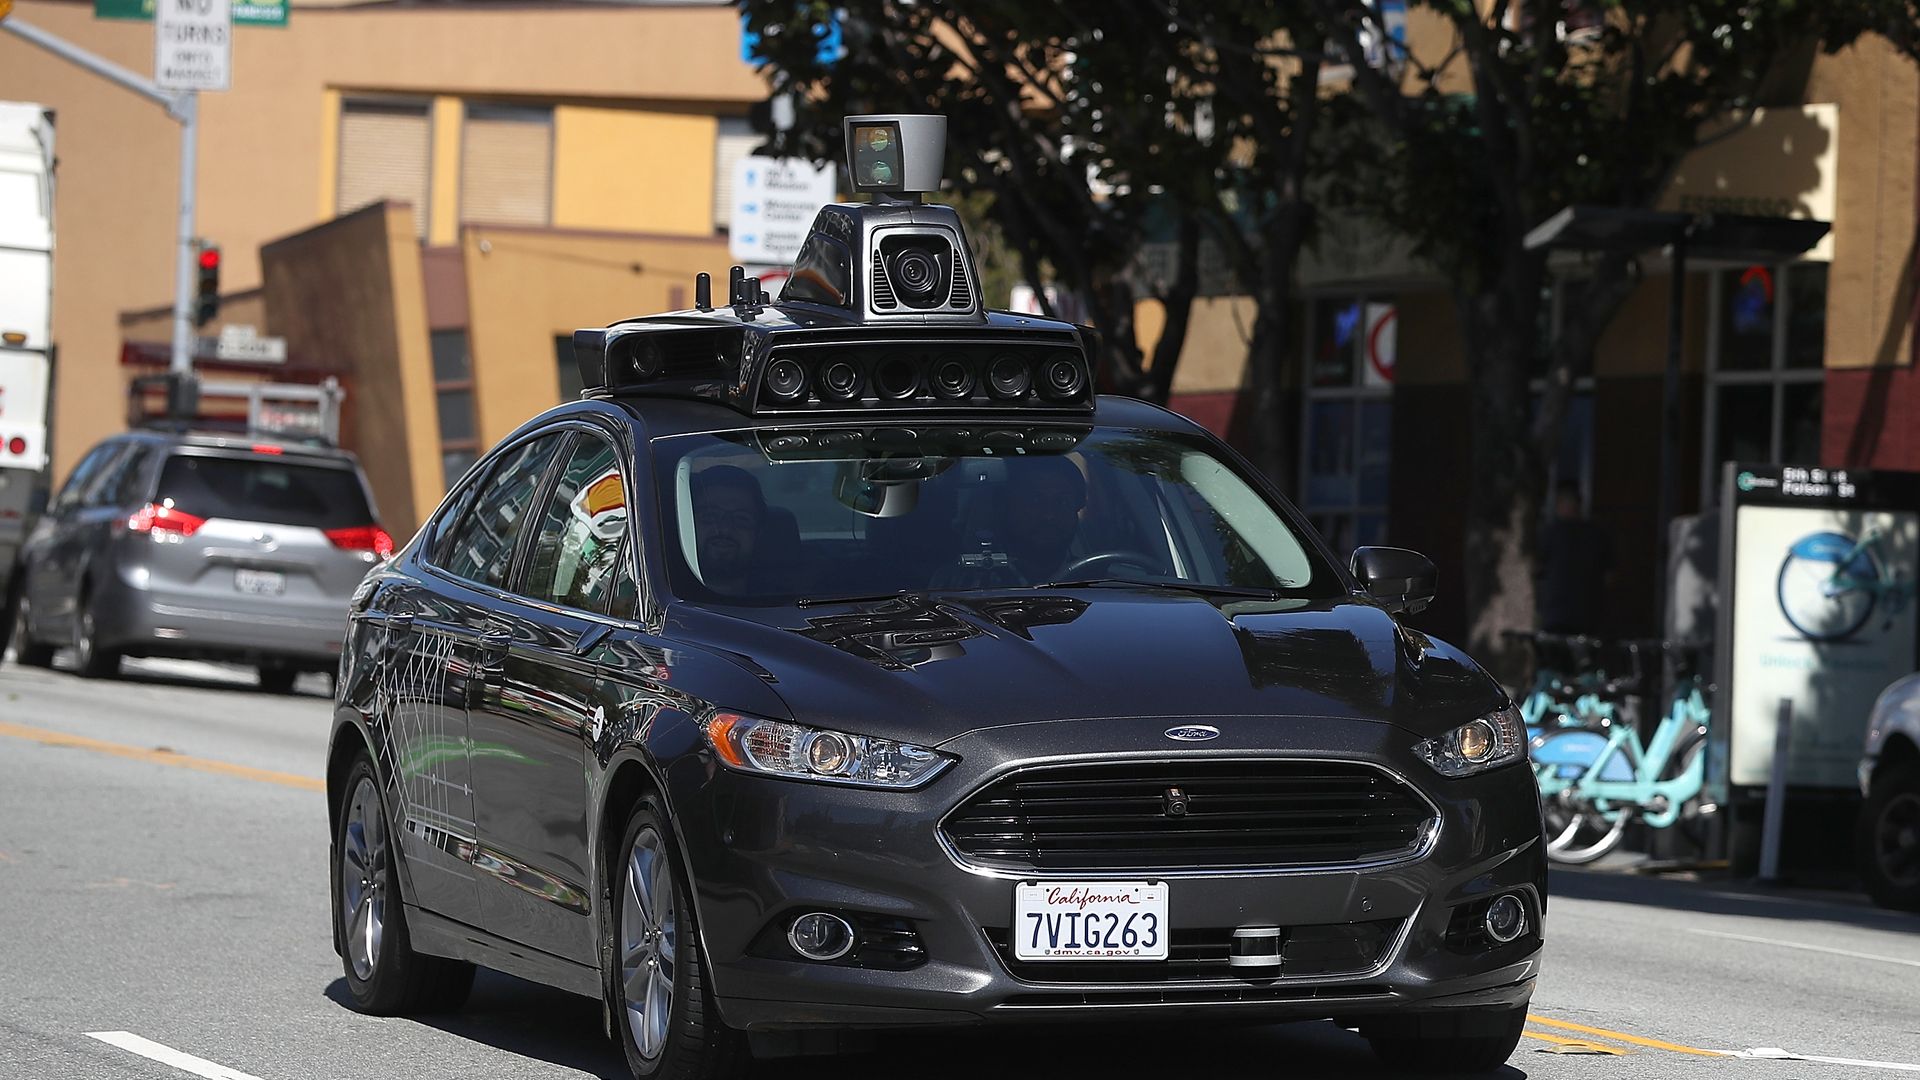 An Uber self-driving car on the road in San Francisco in March 2018, after Uber resumed their self-driving car program following a fatal crash.